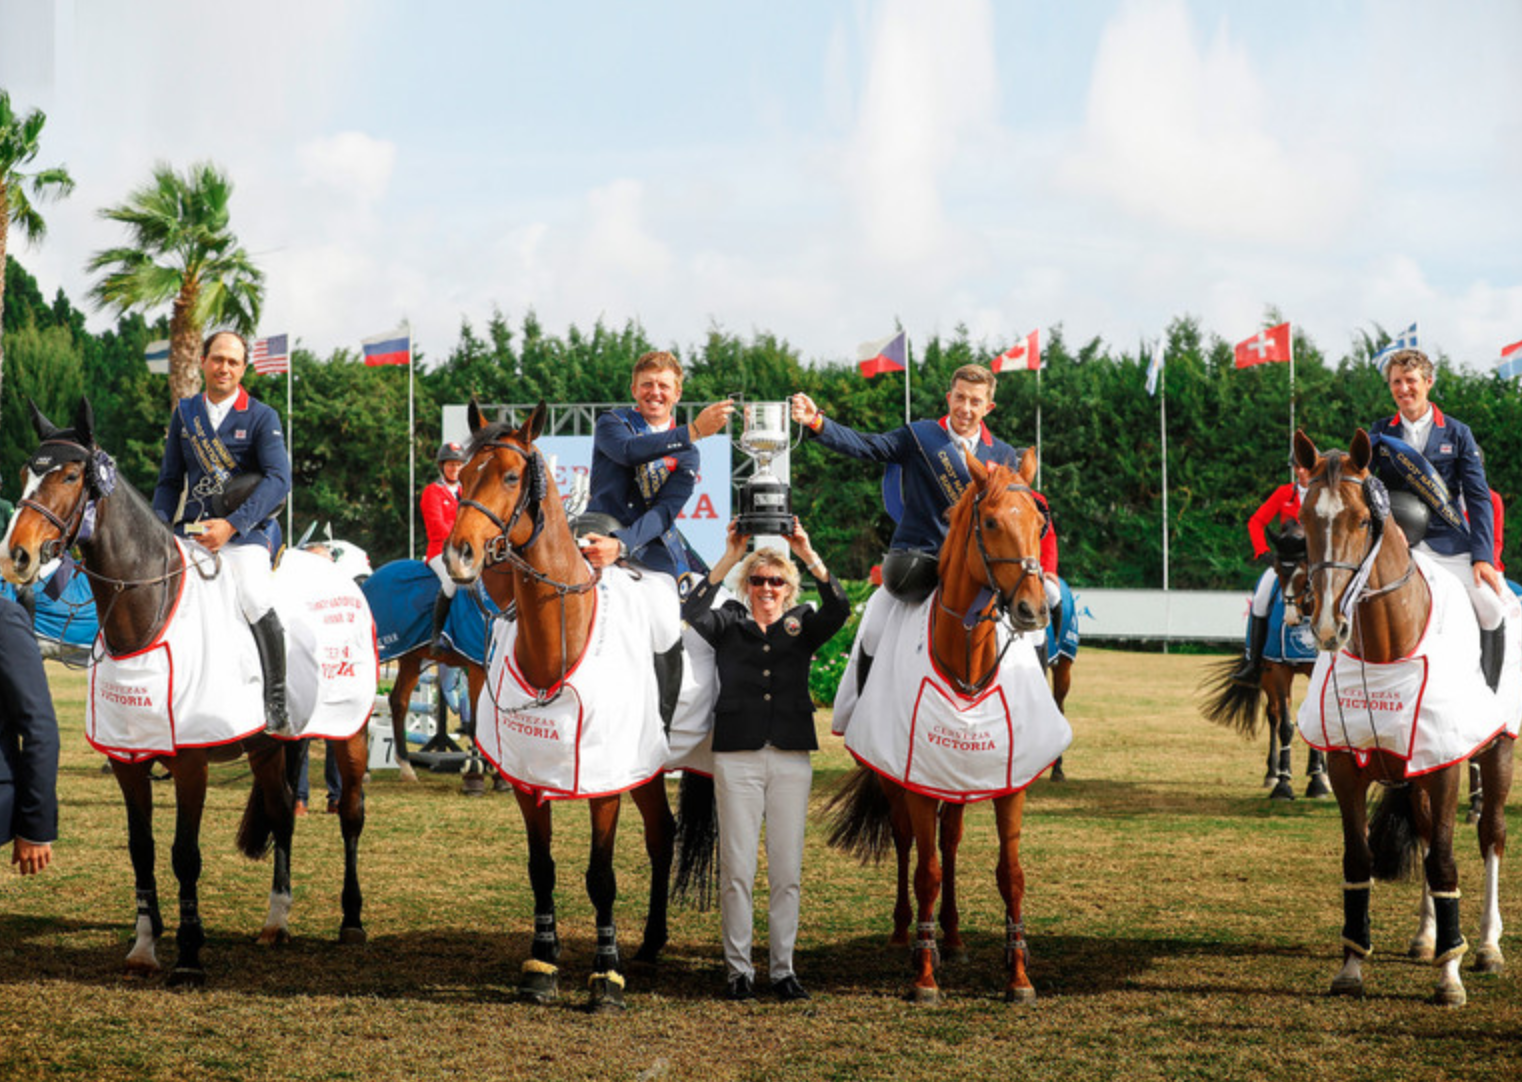 UK takes first place in Nations Cup Sunshine Tour